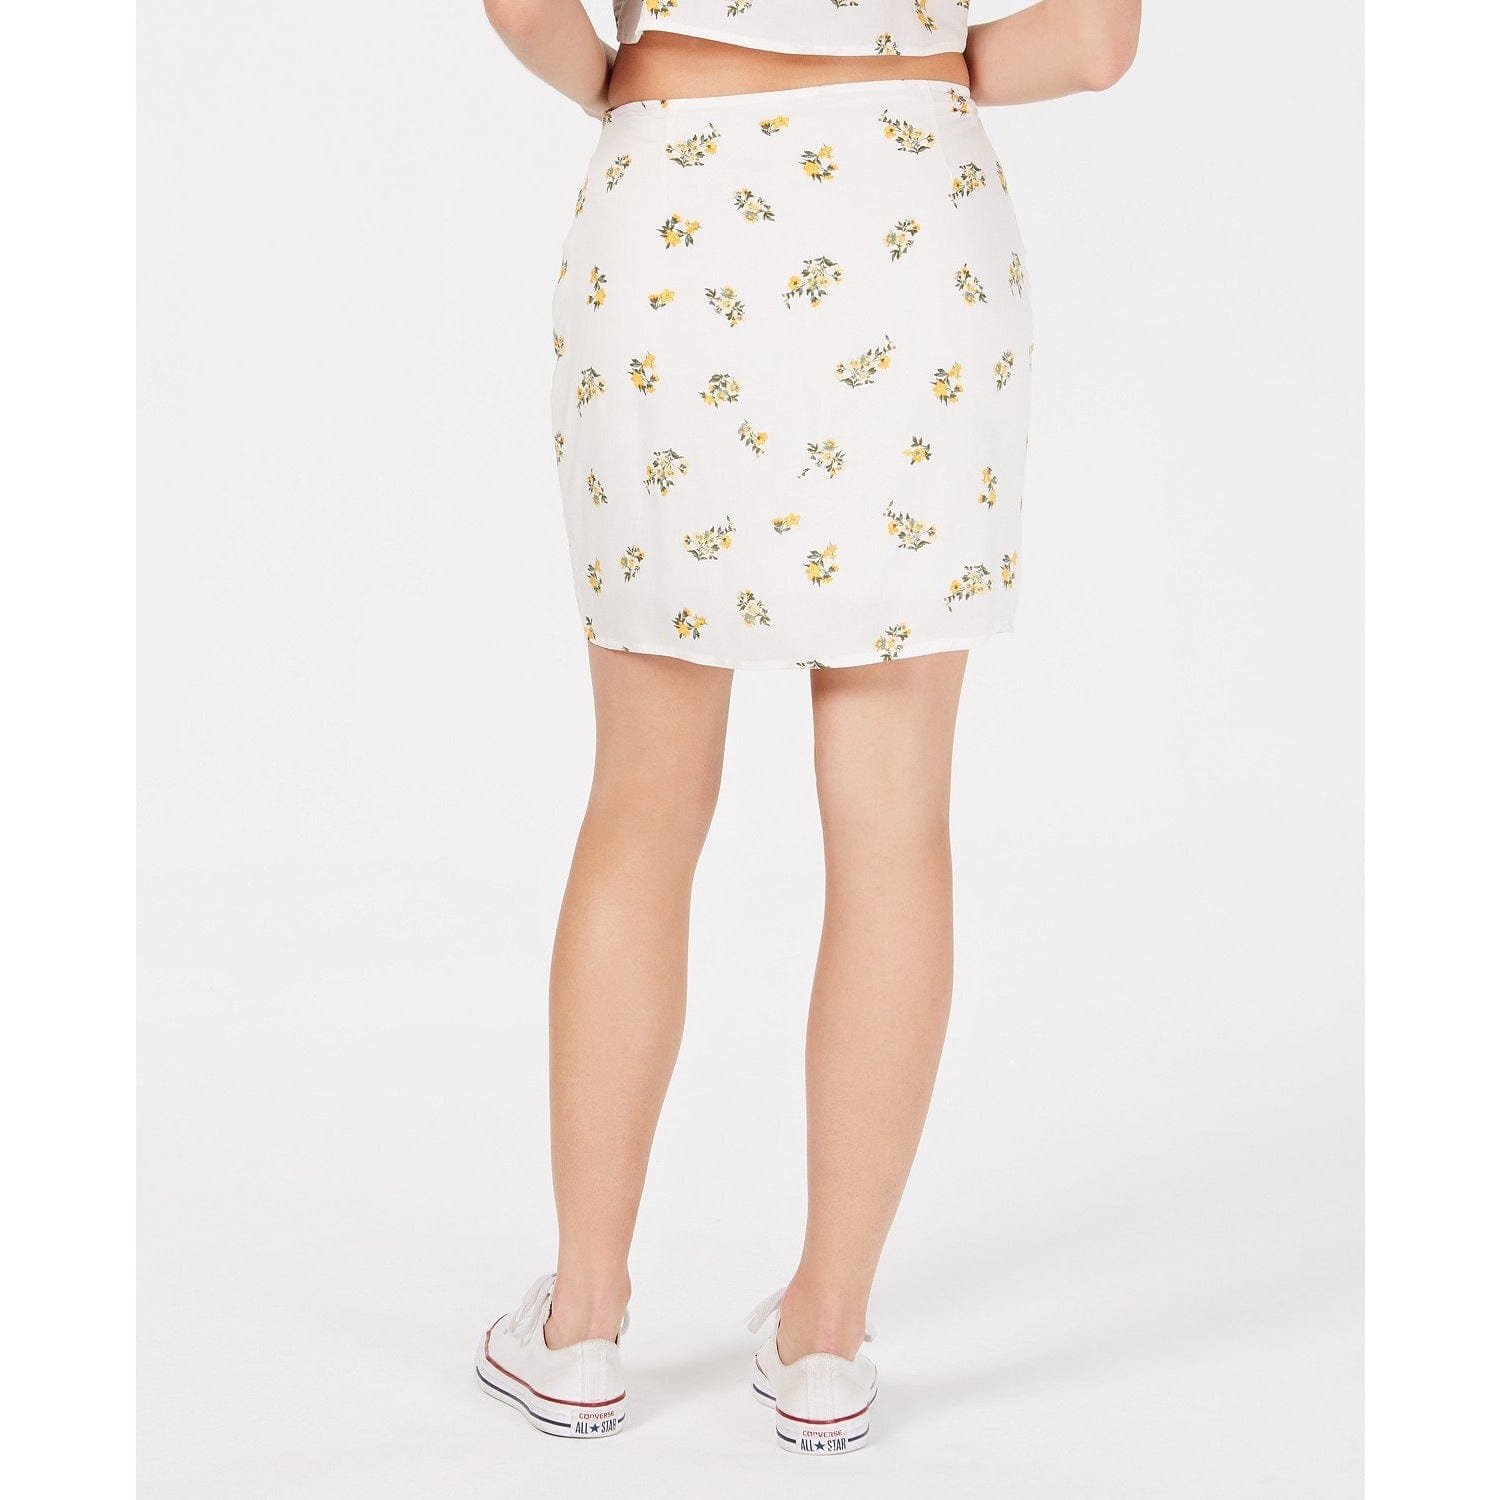 Polly & Esther Juniors' Button-Front Skirt White Floral XL - The Pink Pigs, A Compassionate Boutique